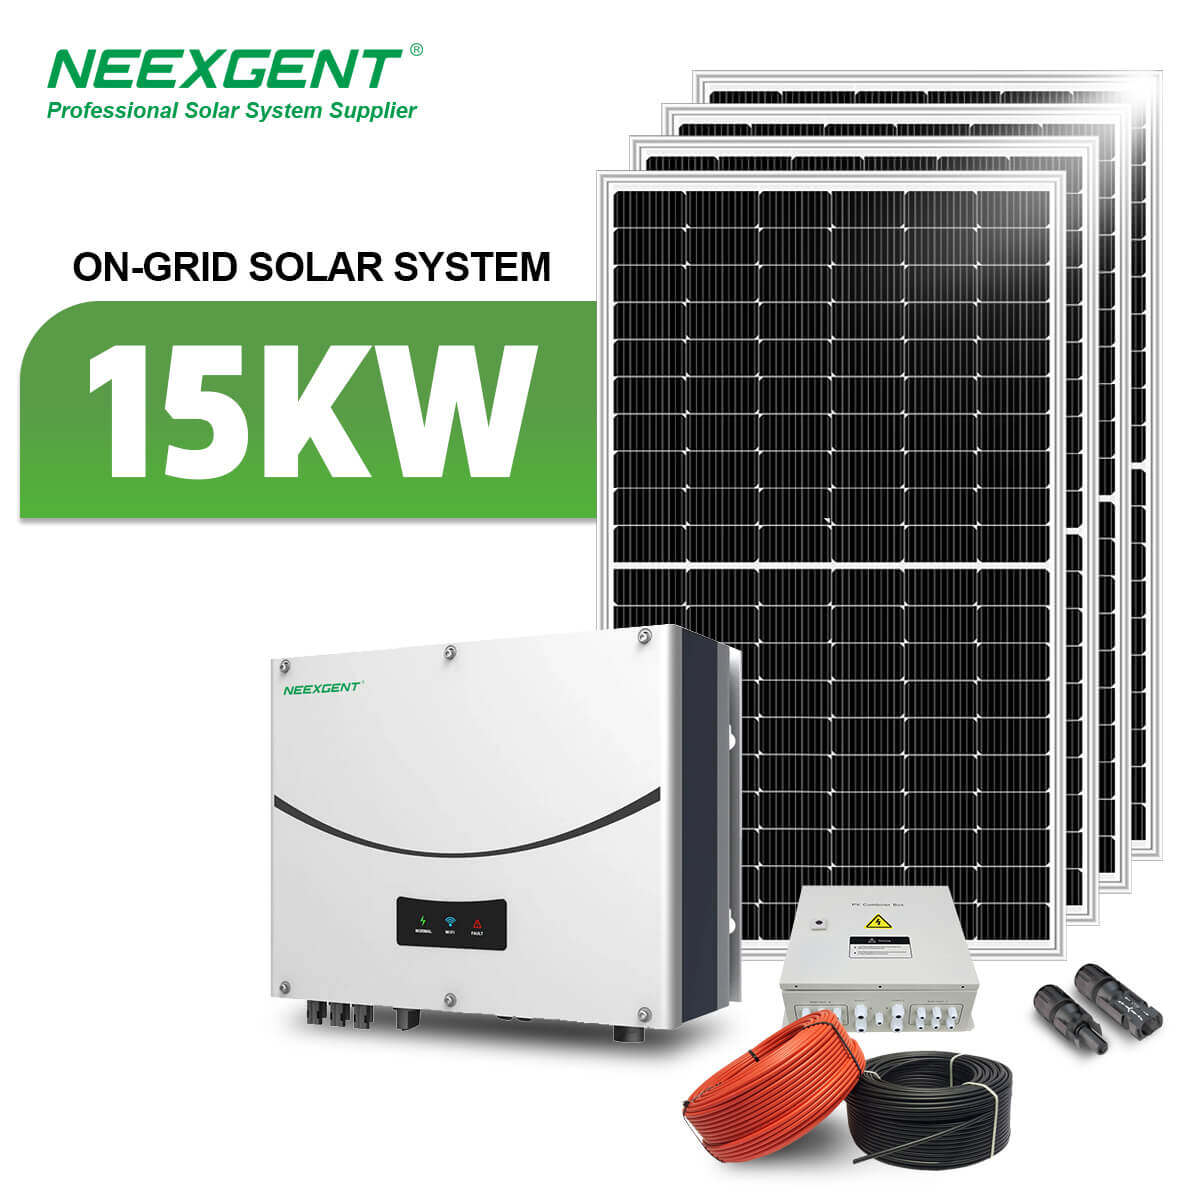 Neexgent Home Solar Power System 15kw On Grid With Solar Panels Solar Energy System